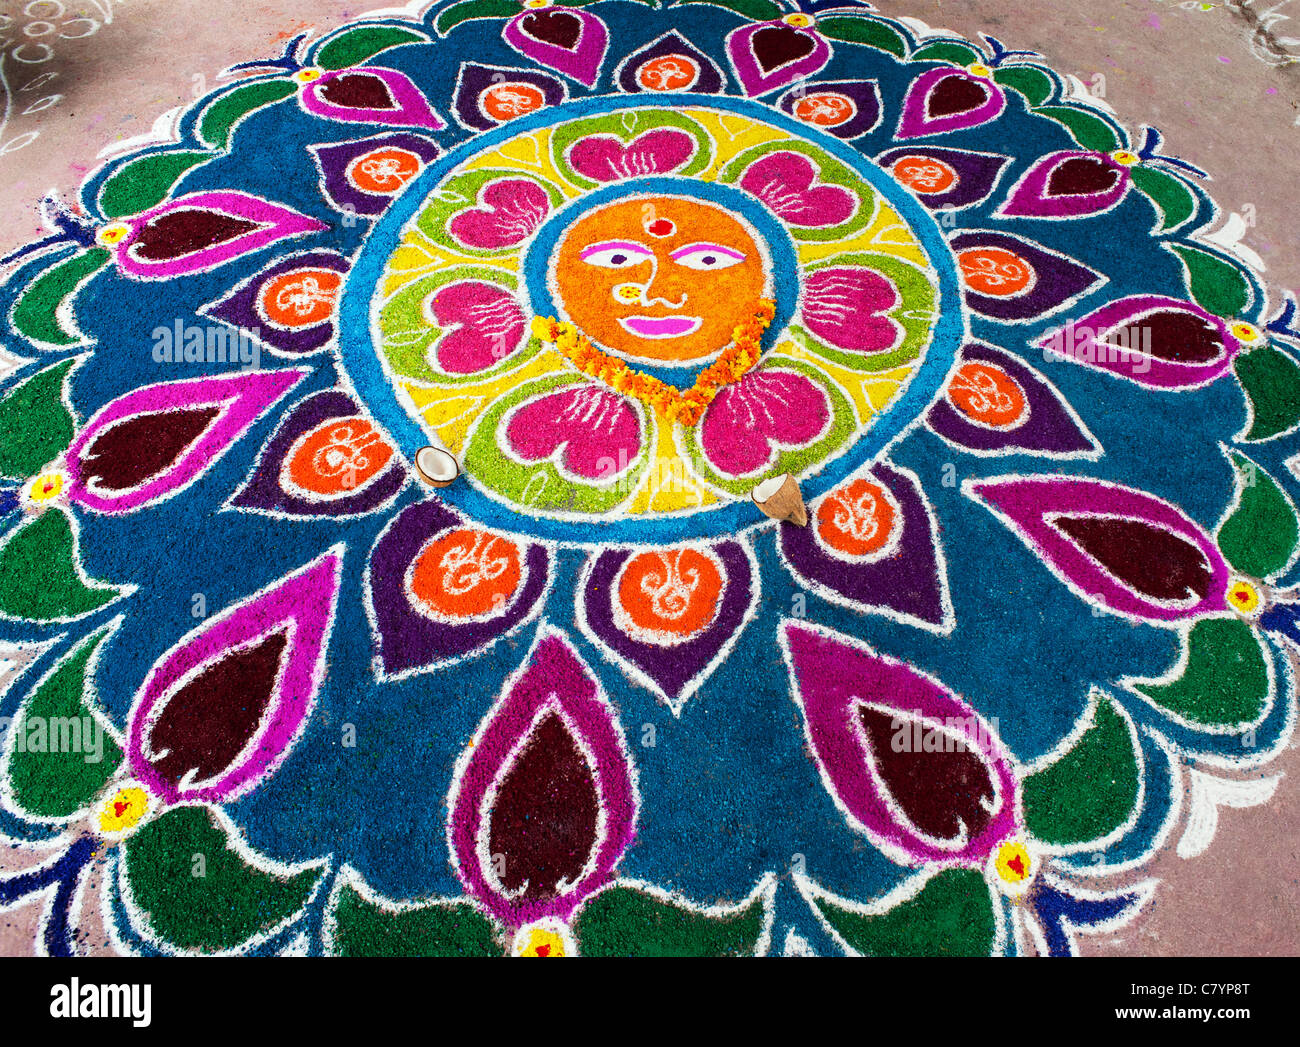 Rangoli design on an Indian street outside a hindu temple during ...